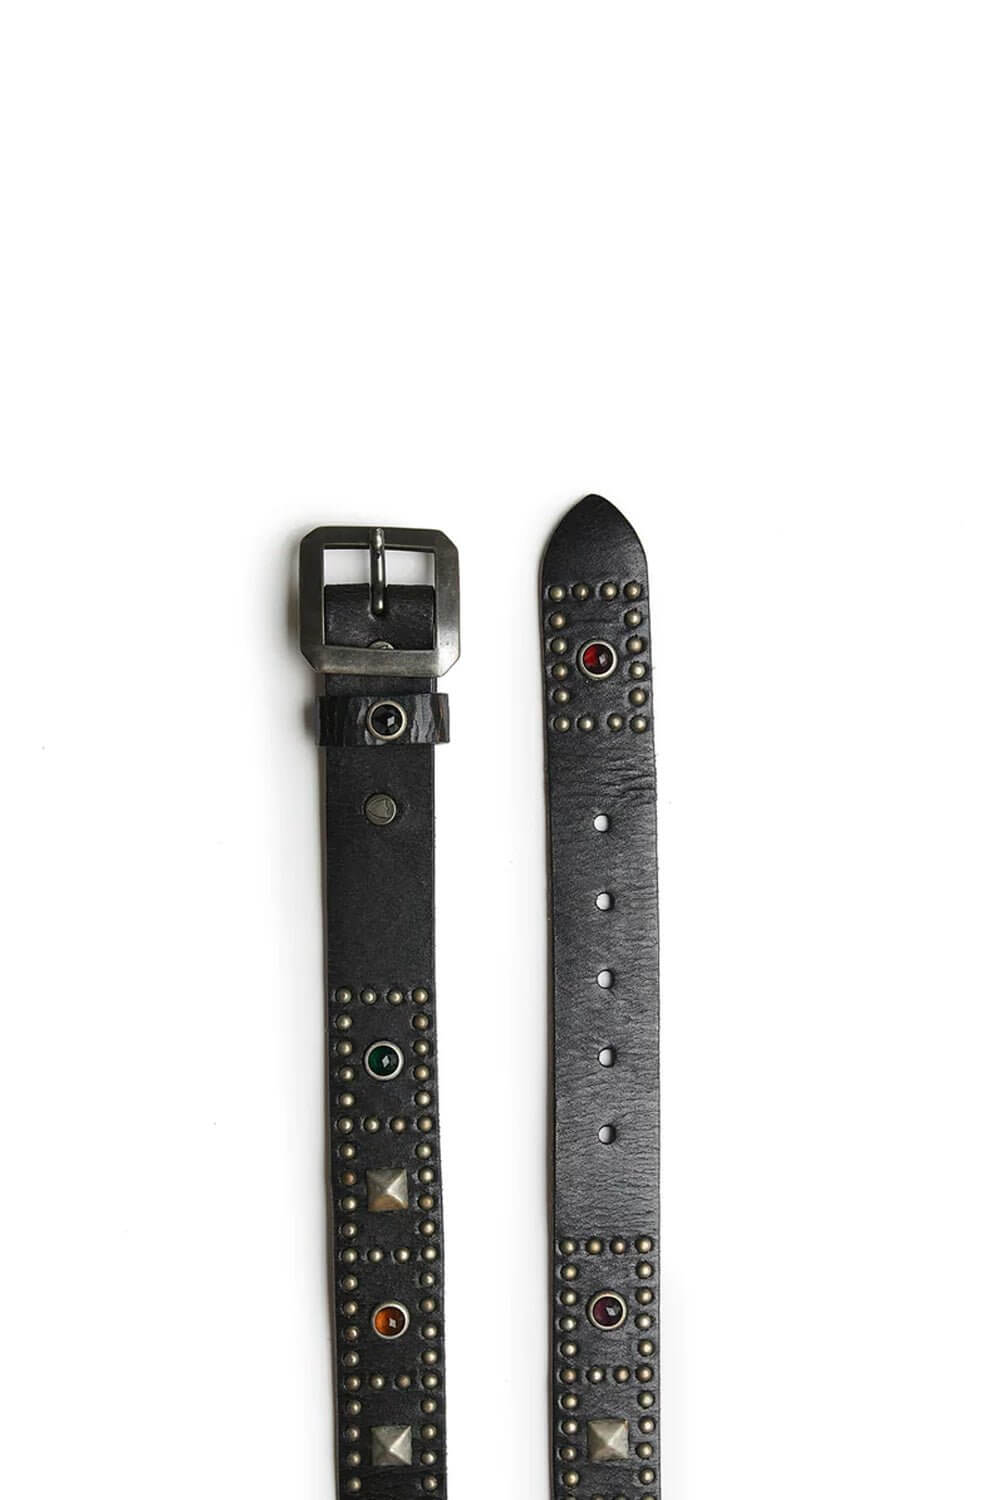 TROUBADOUR BELT Leather belt with studs and glass stones. Brass buckle. 3,5 cm height. HTC LOS ANGELES